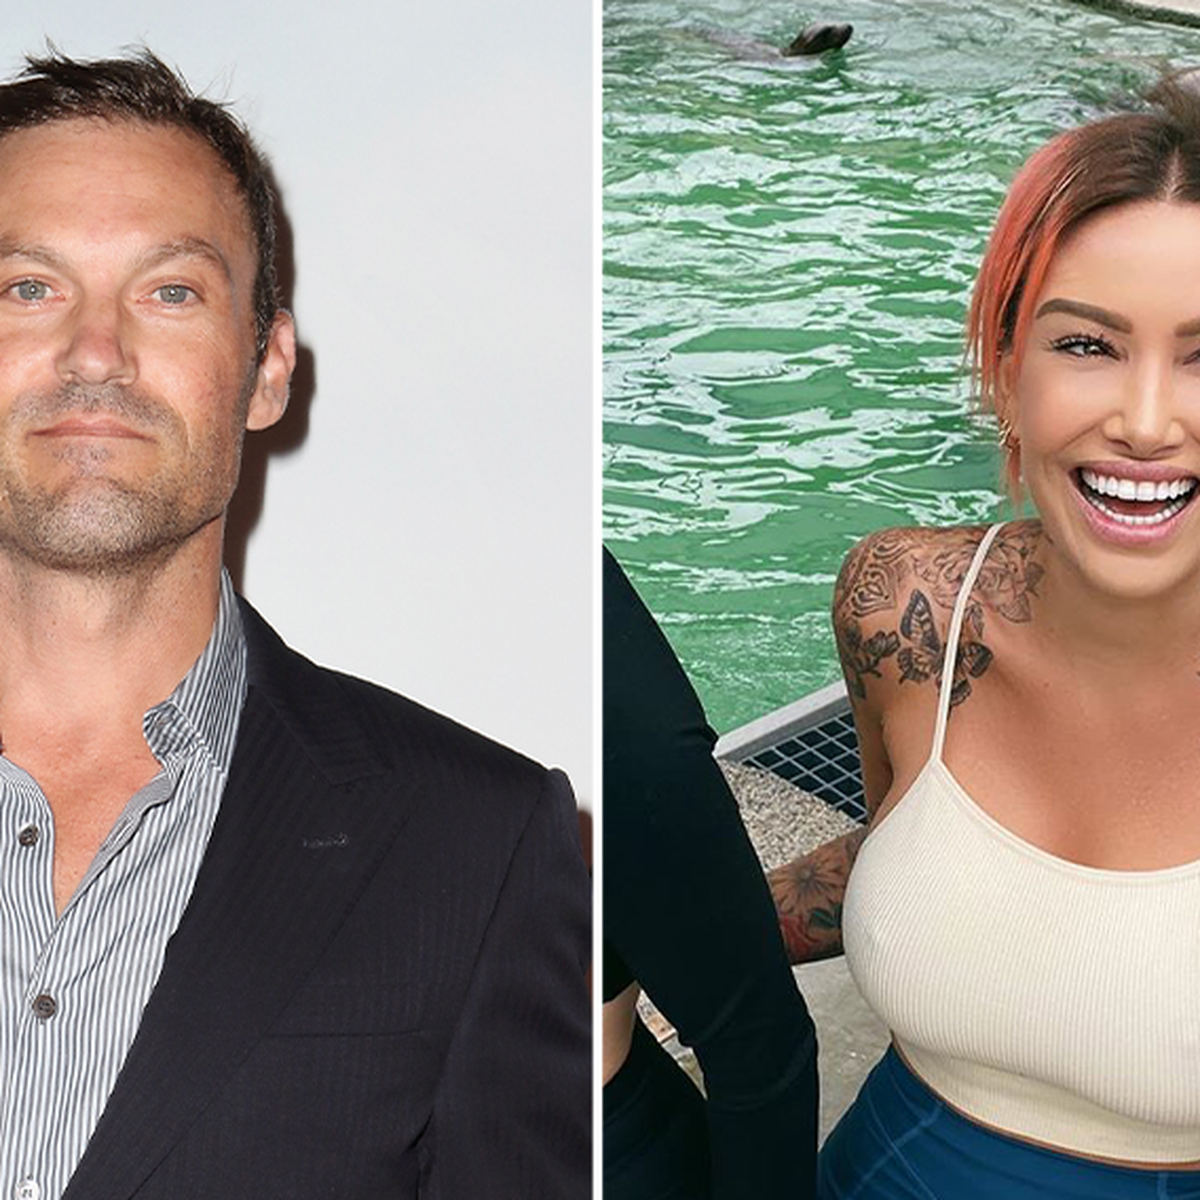 What's Really Going on With Brian Austin Green & Model Tina Louise